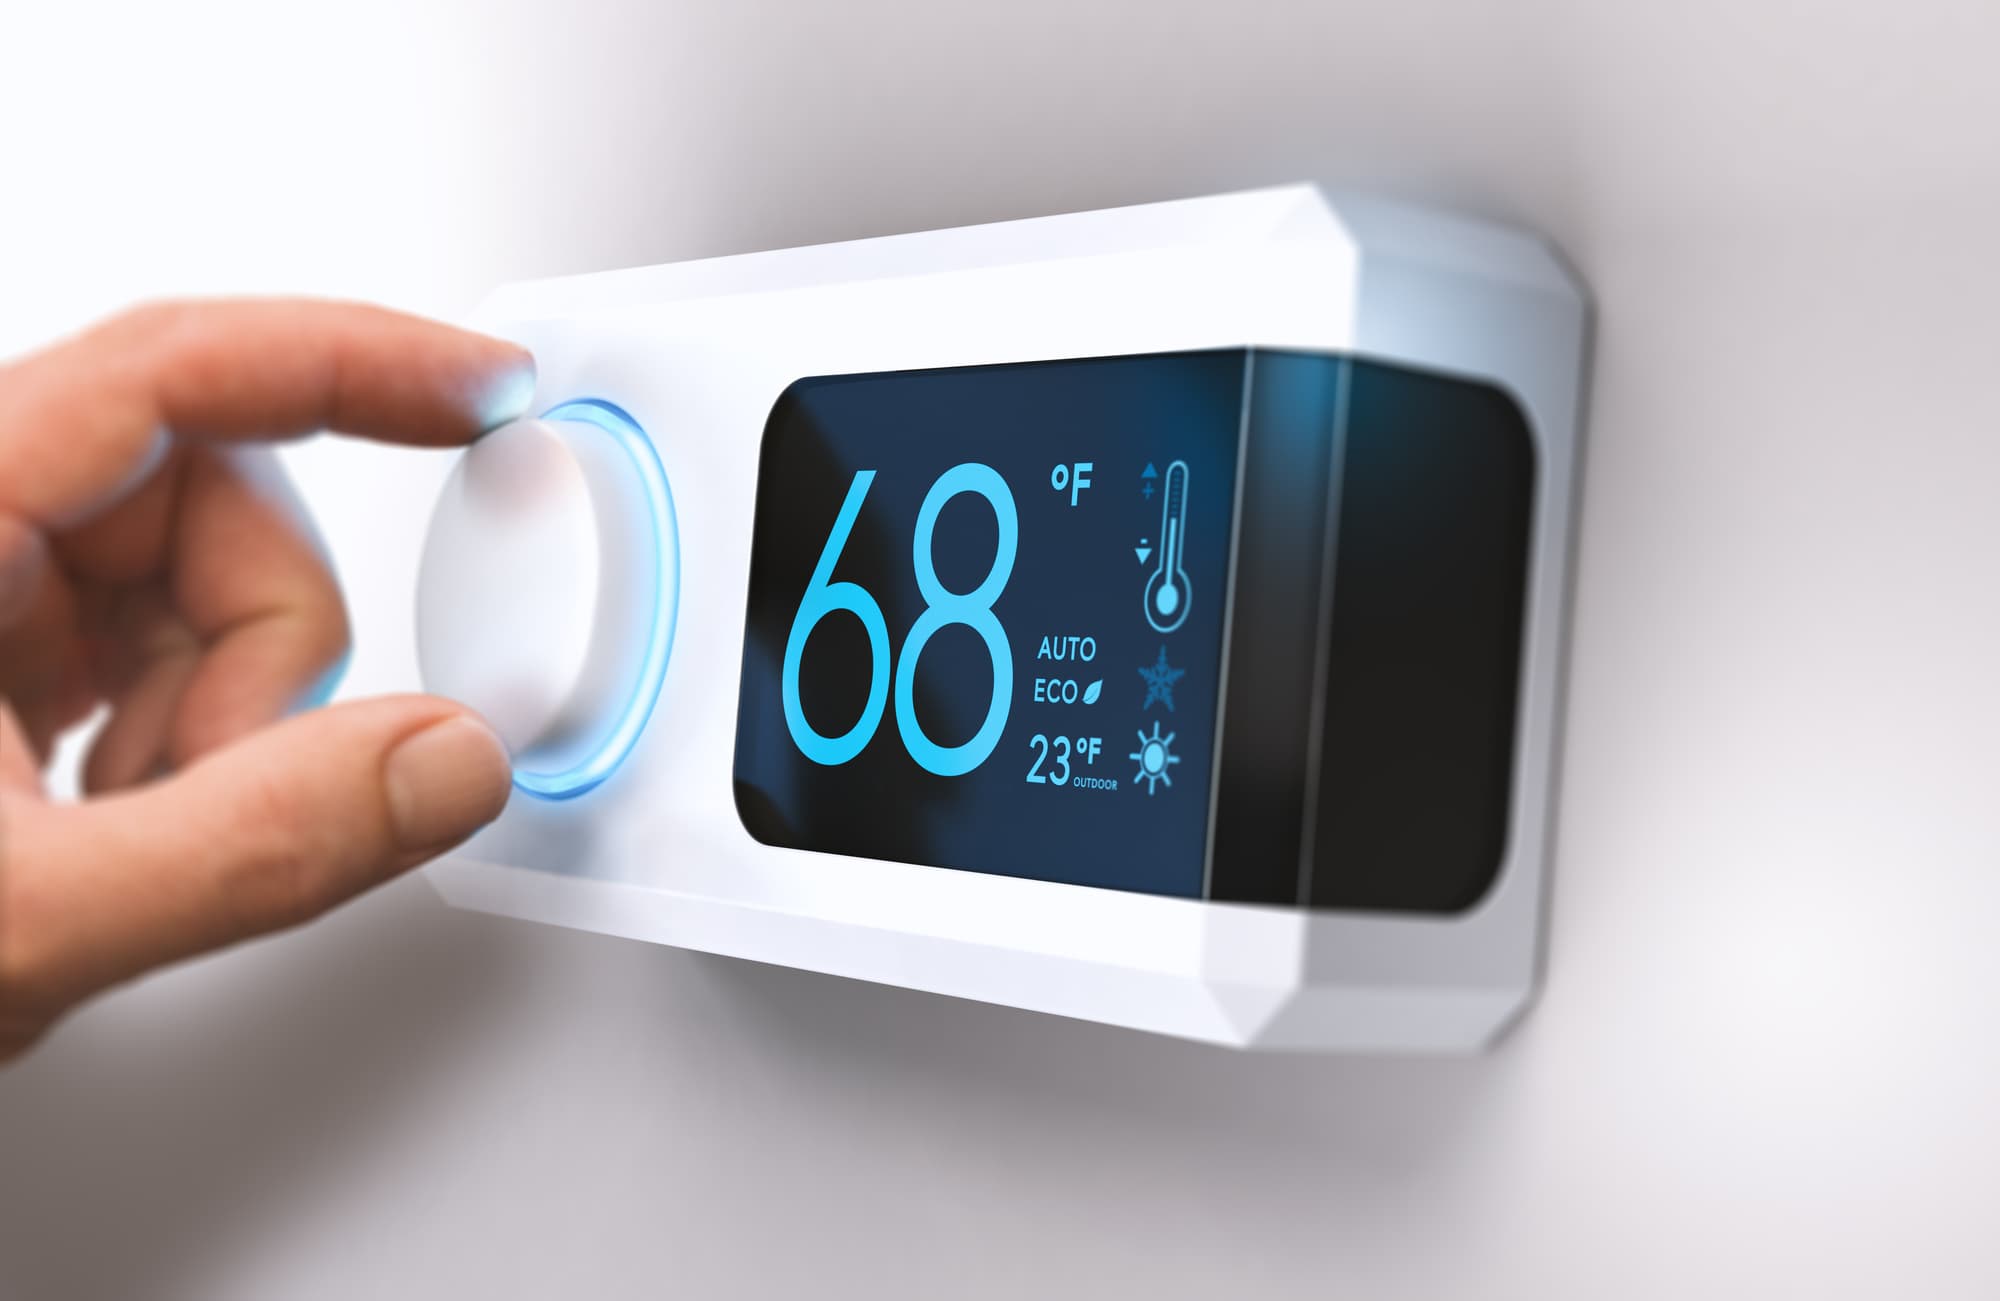 https://sewellelectric.com/wp-content/uploads/2020/09/Thermostat-Home-Energy-Saving.jpg